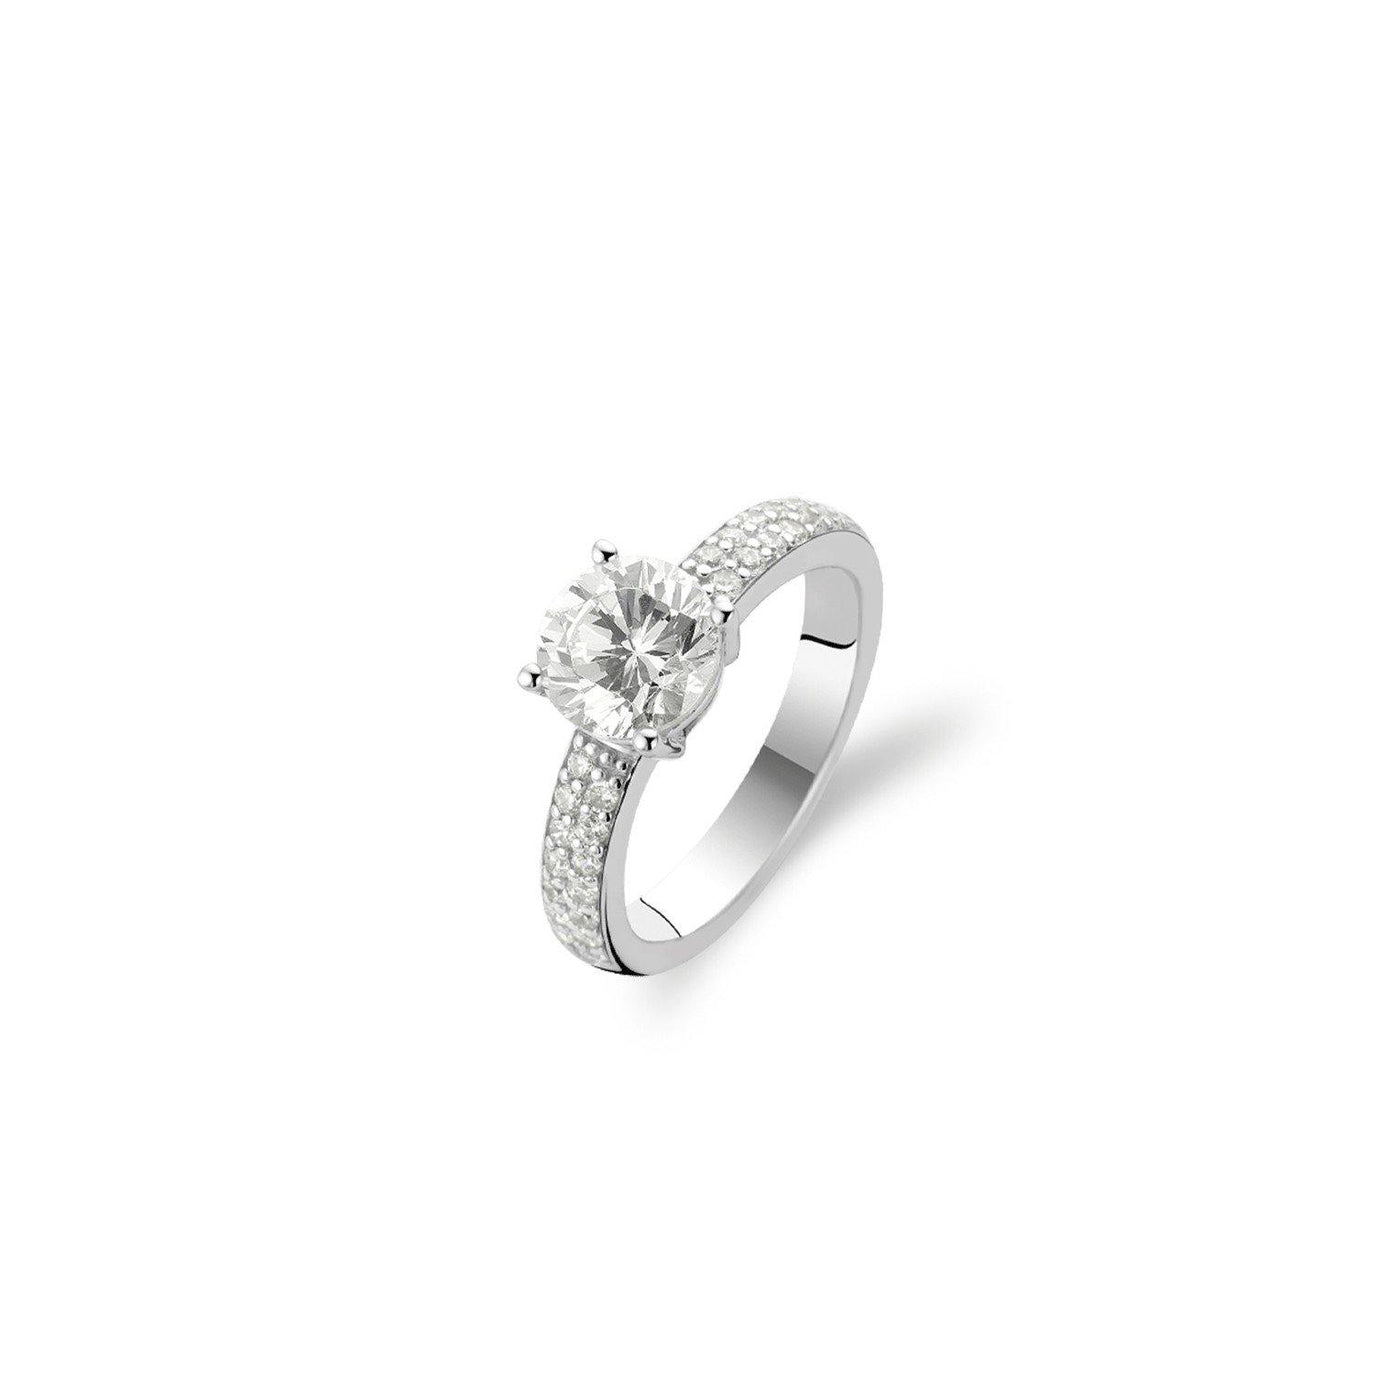 Ti Sento Sterling Silver Ring with Cubic Zirconia Stones - Rococo Jewellery